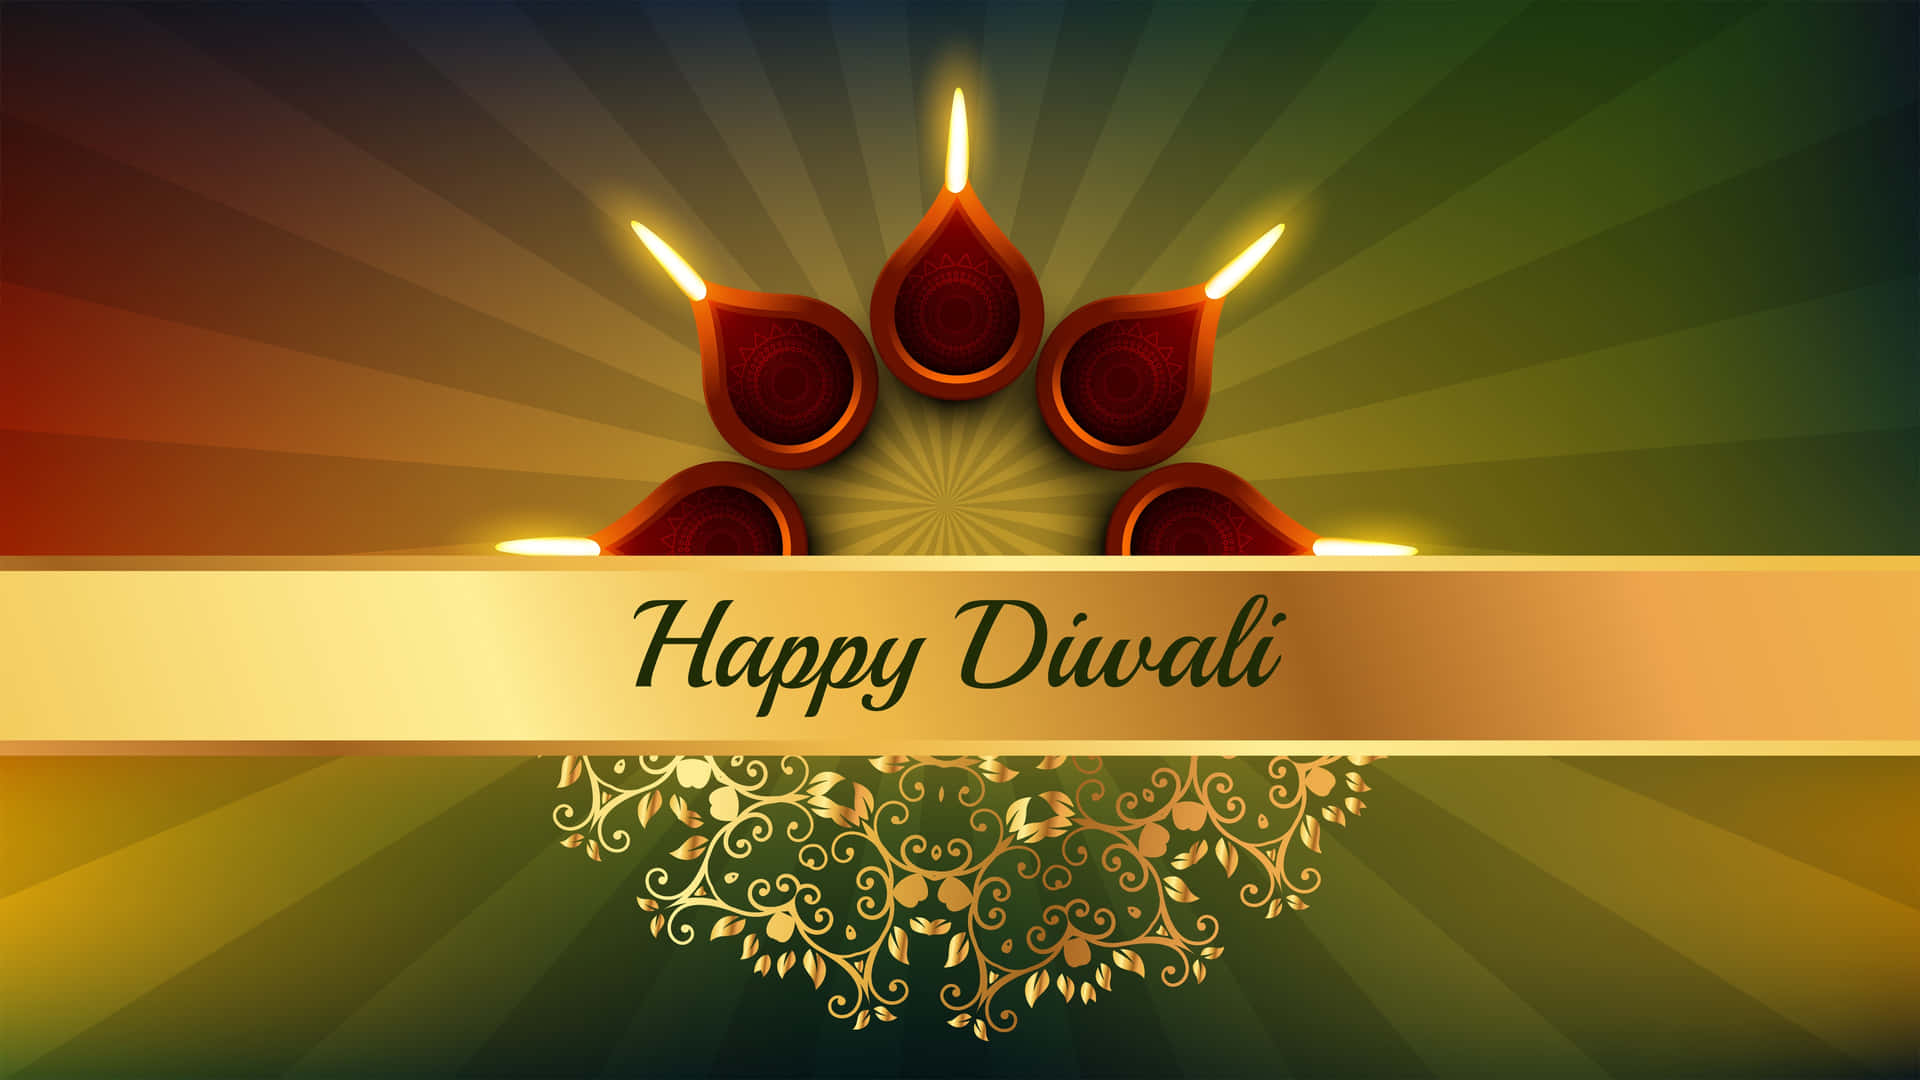 Happy Diwali Greeting Card With Candles And Gold Background